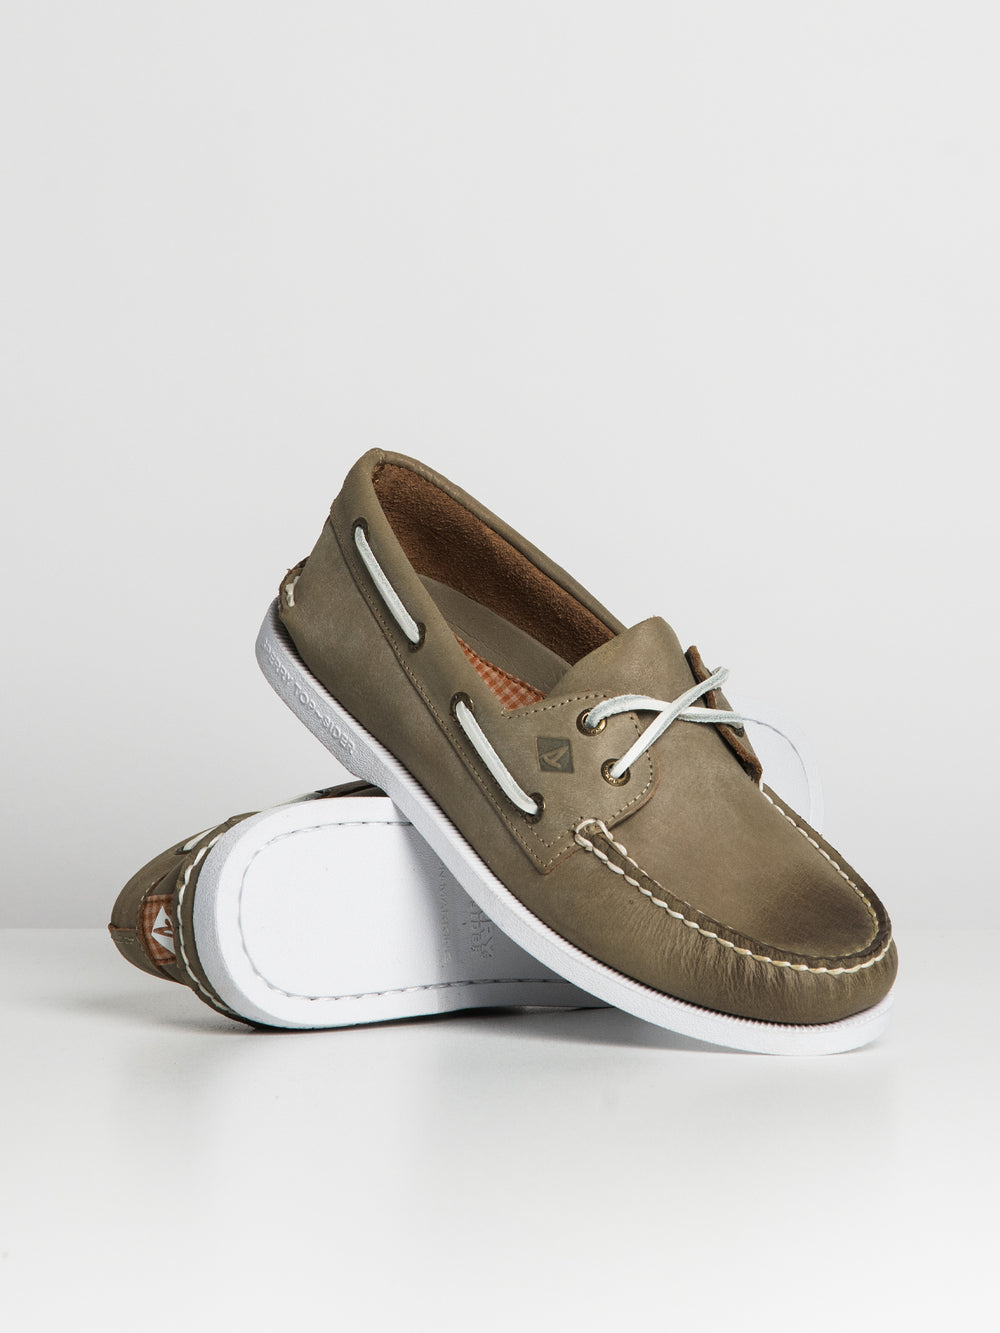 MENS SPERRY AUTHENTIC ORIGINAL 3EYE WHITEWASHED - CLEARANCE